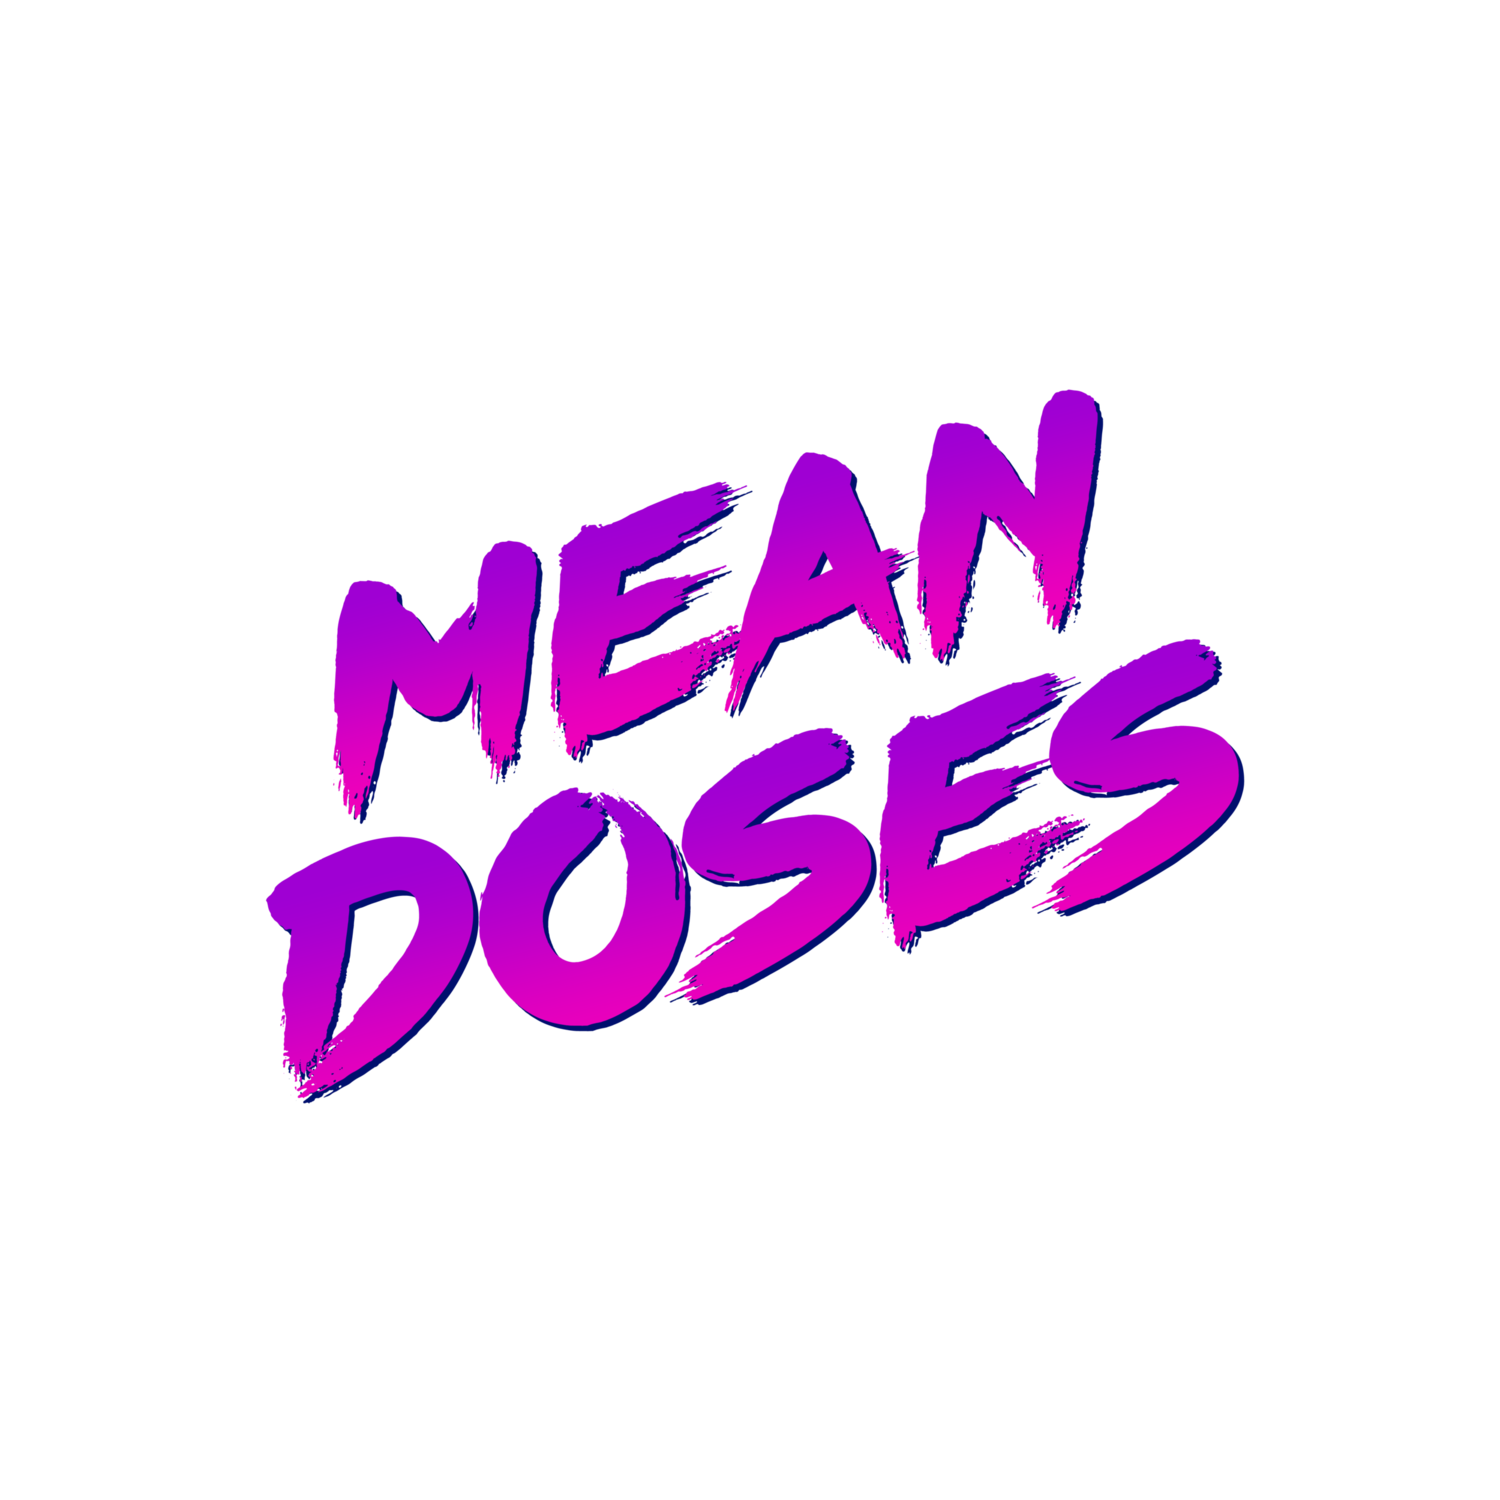 Mean Doses